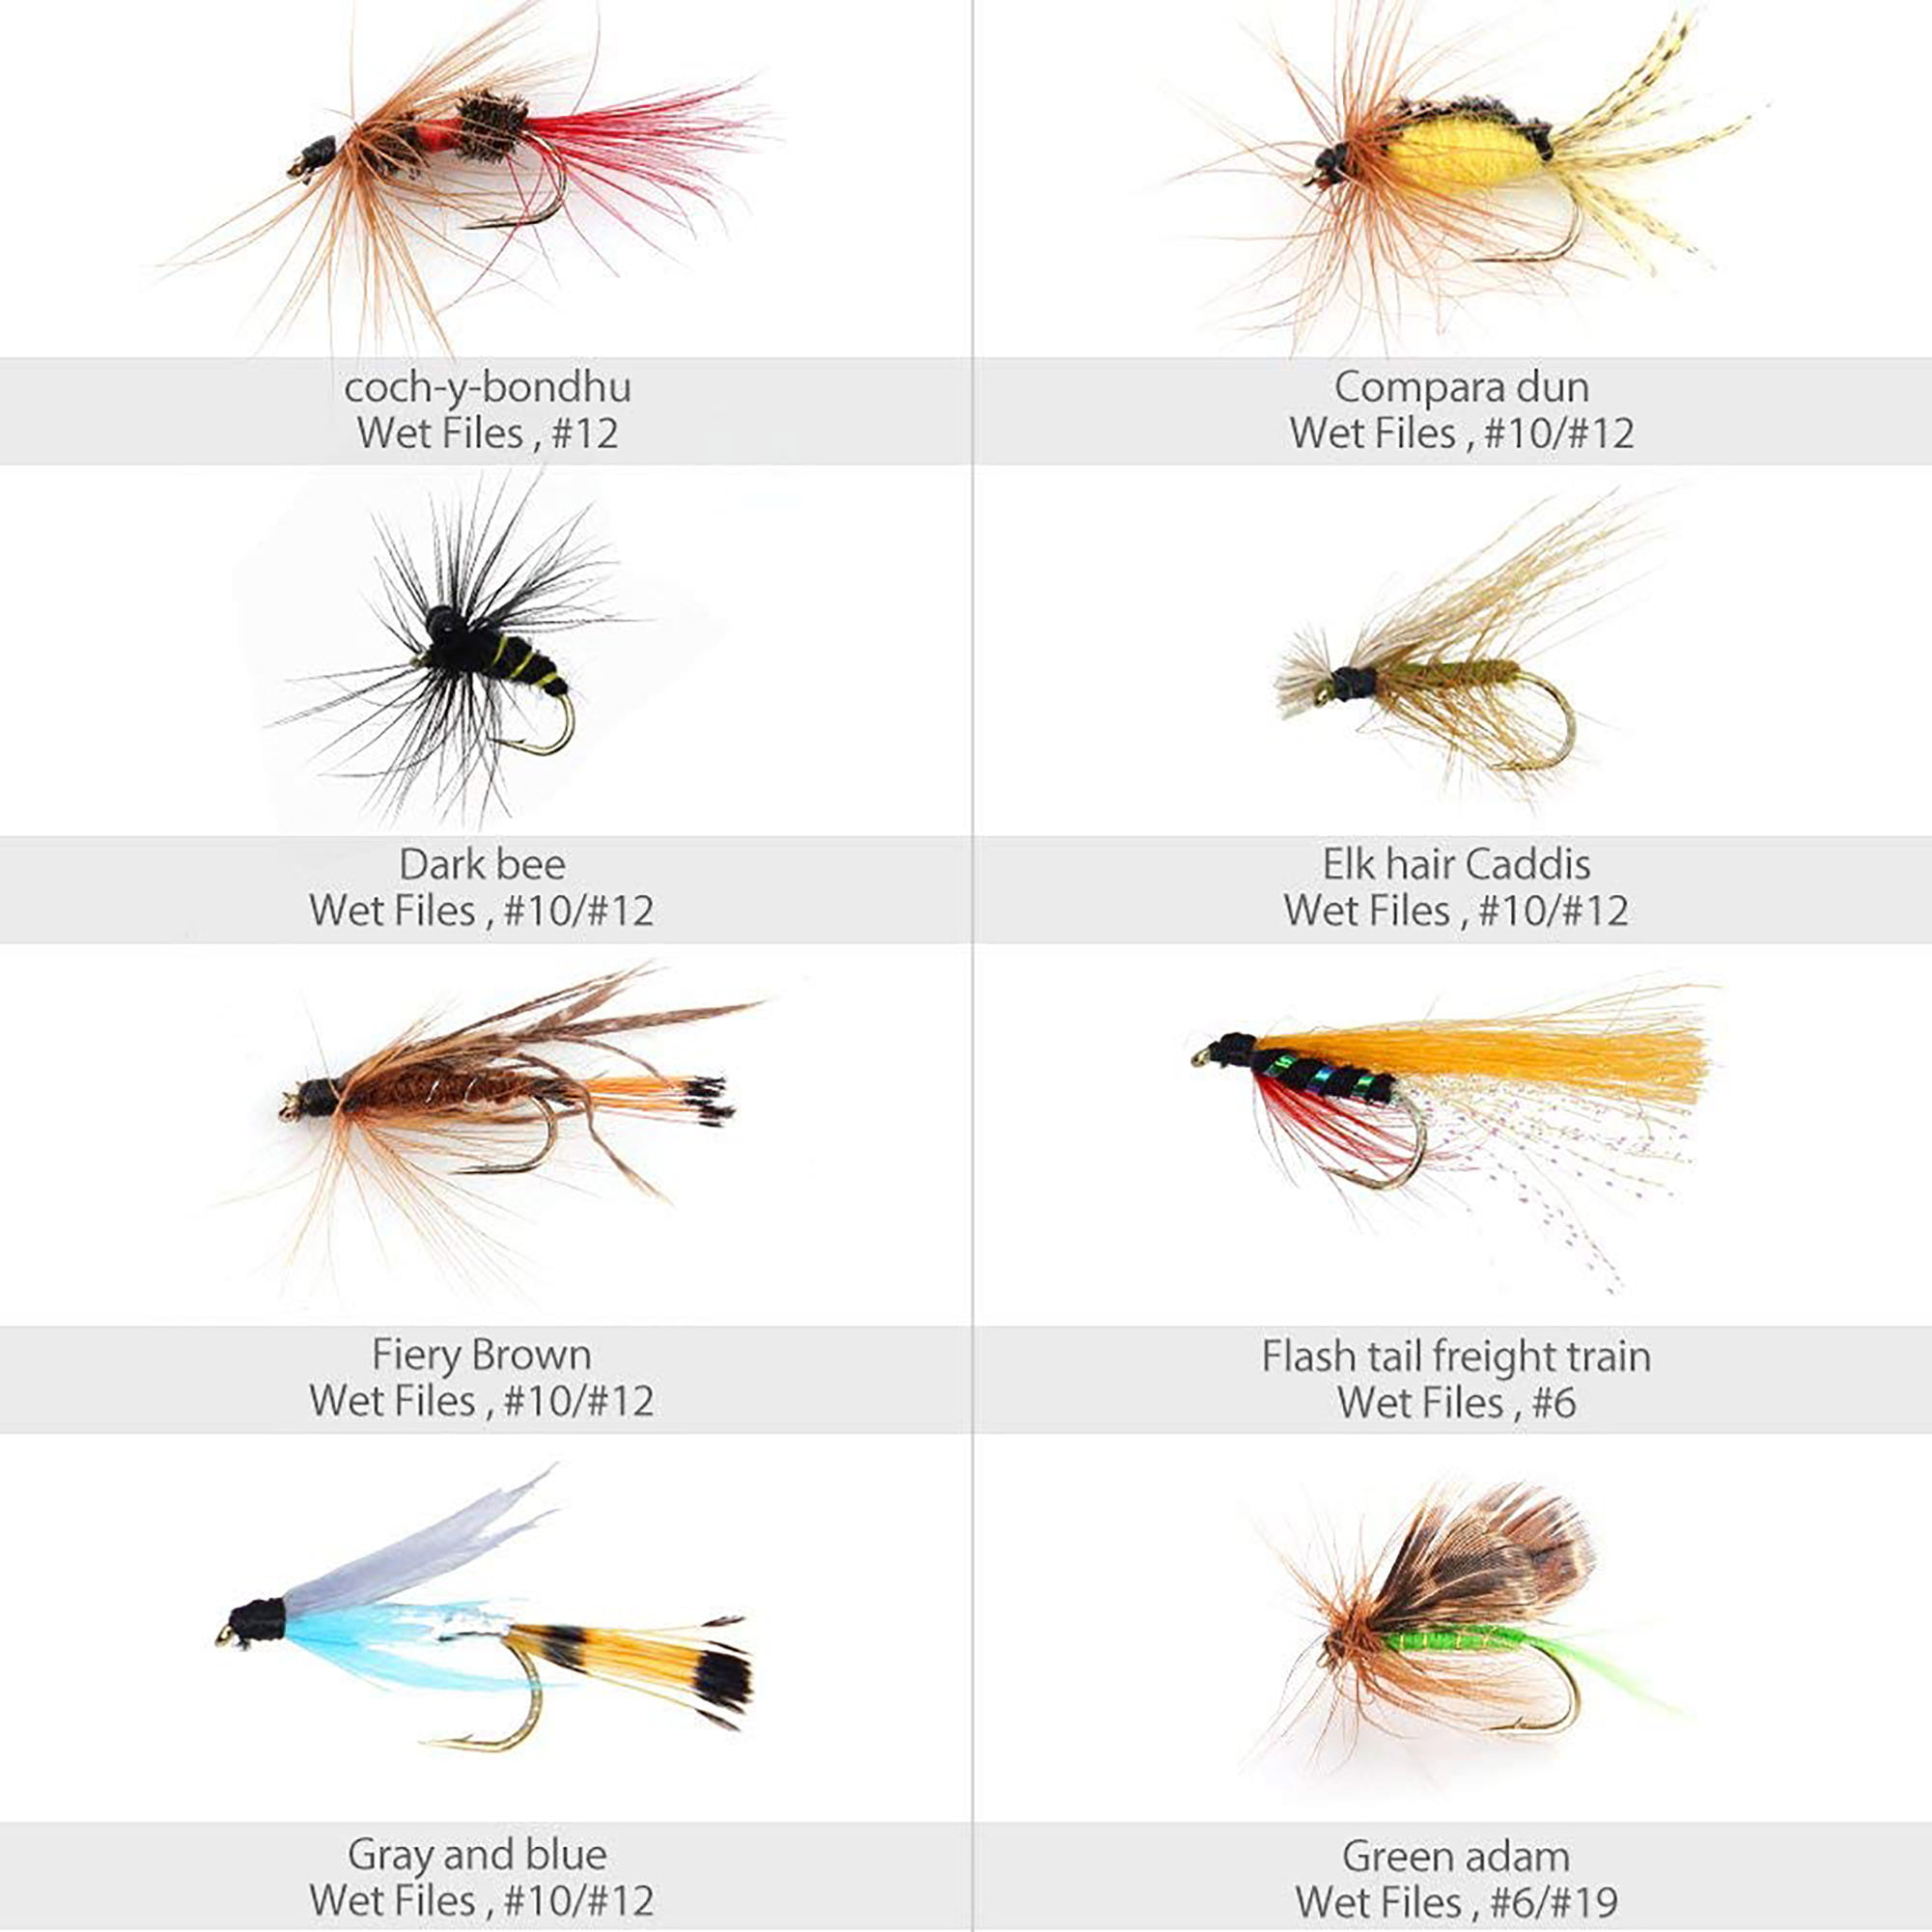 6 x Adams Comparadun Dry Fly Fishing Flies For Trout Salmon 